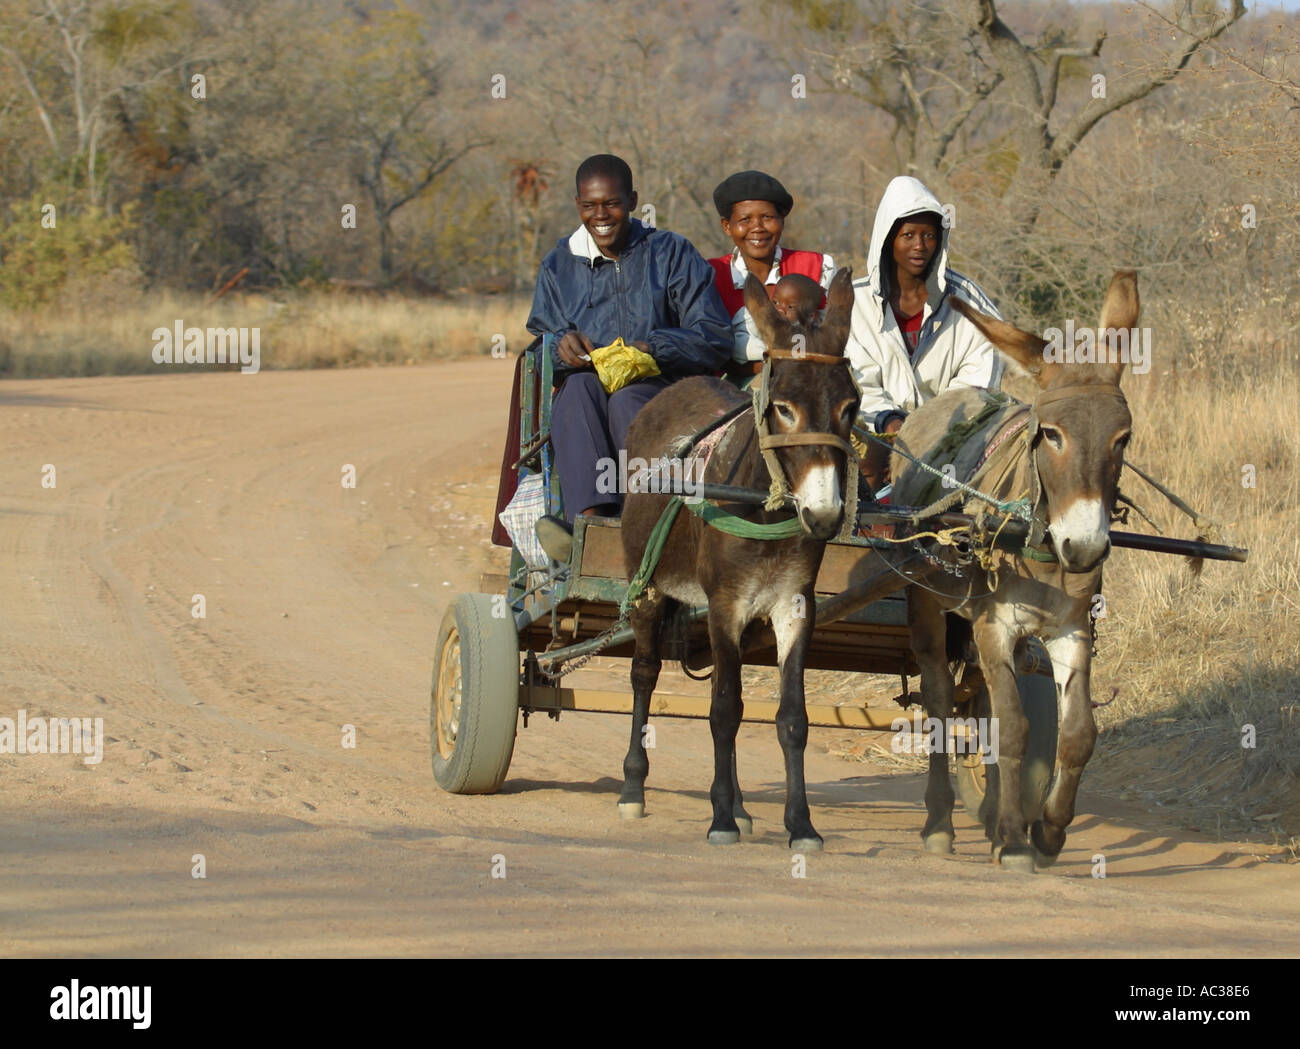 Donkey cart with passengers on rural road in south africa Stock Photo